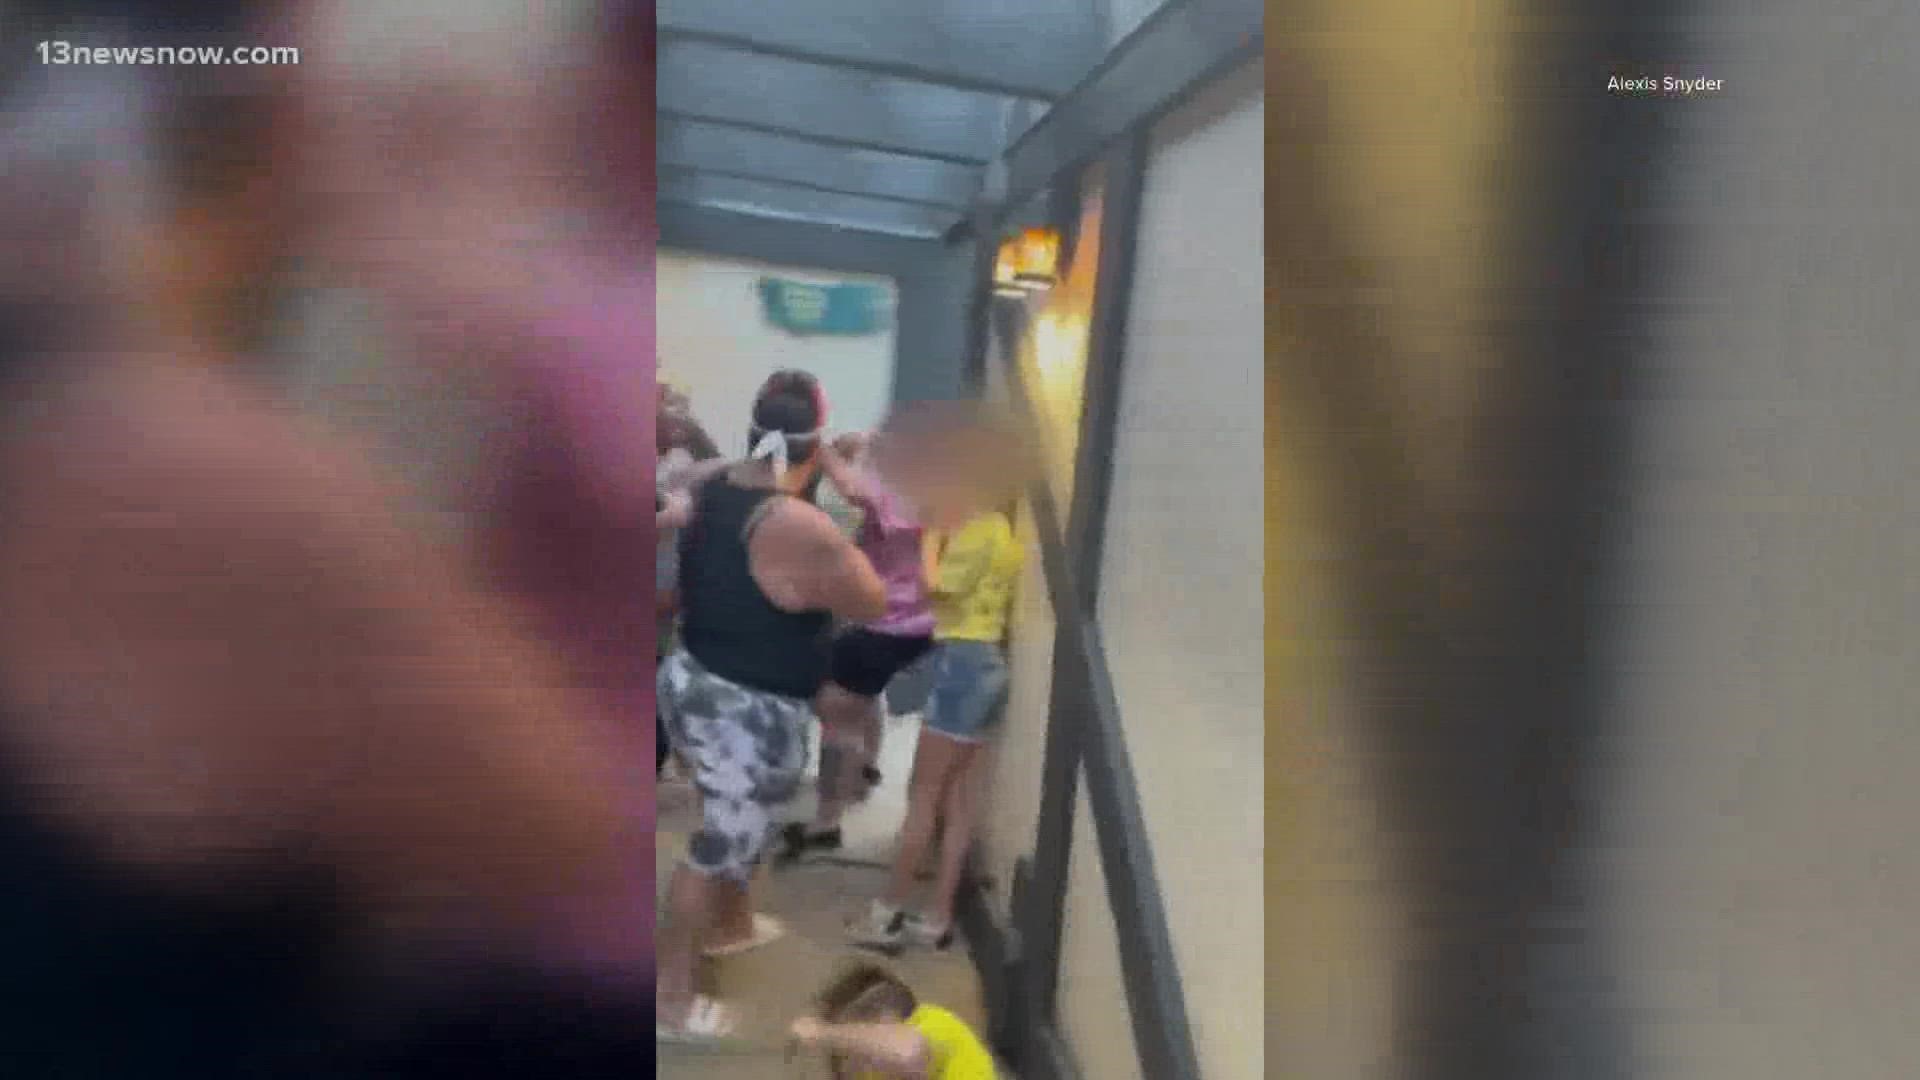 James City County police said Christine Howard was one of three women seen in video of a fight in the line for Griffon. The others already received sentences.